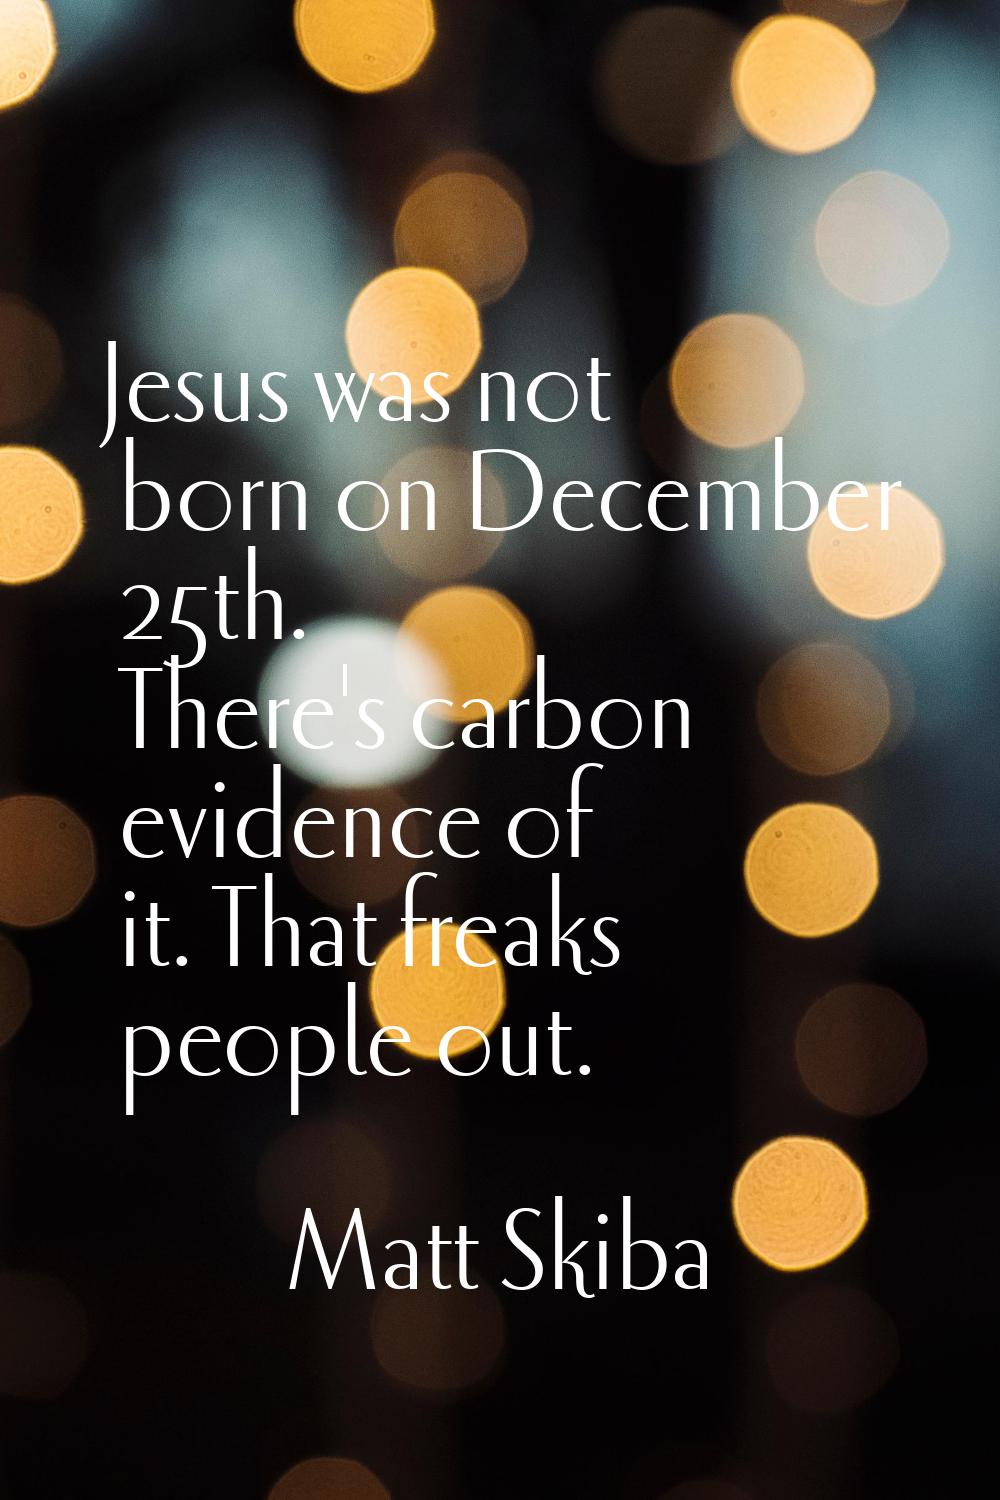 Jesus was not born on December 25th. There's carbon evidence of it. That freaks people out.